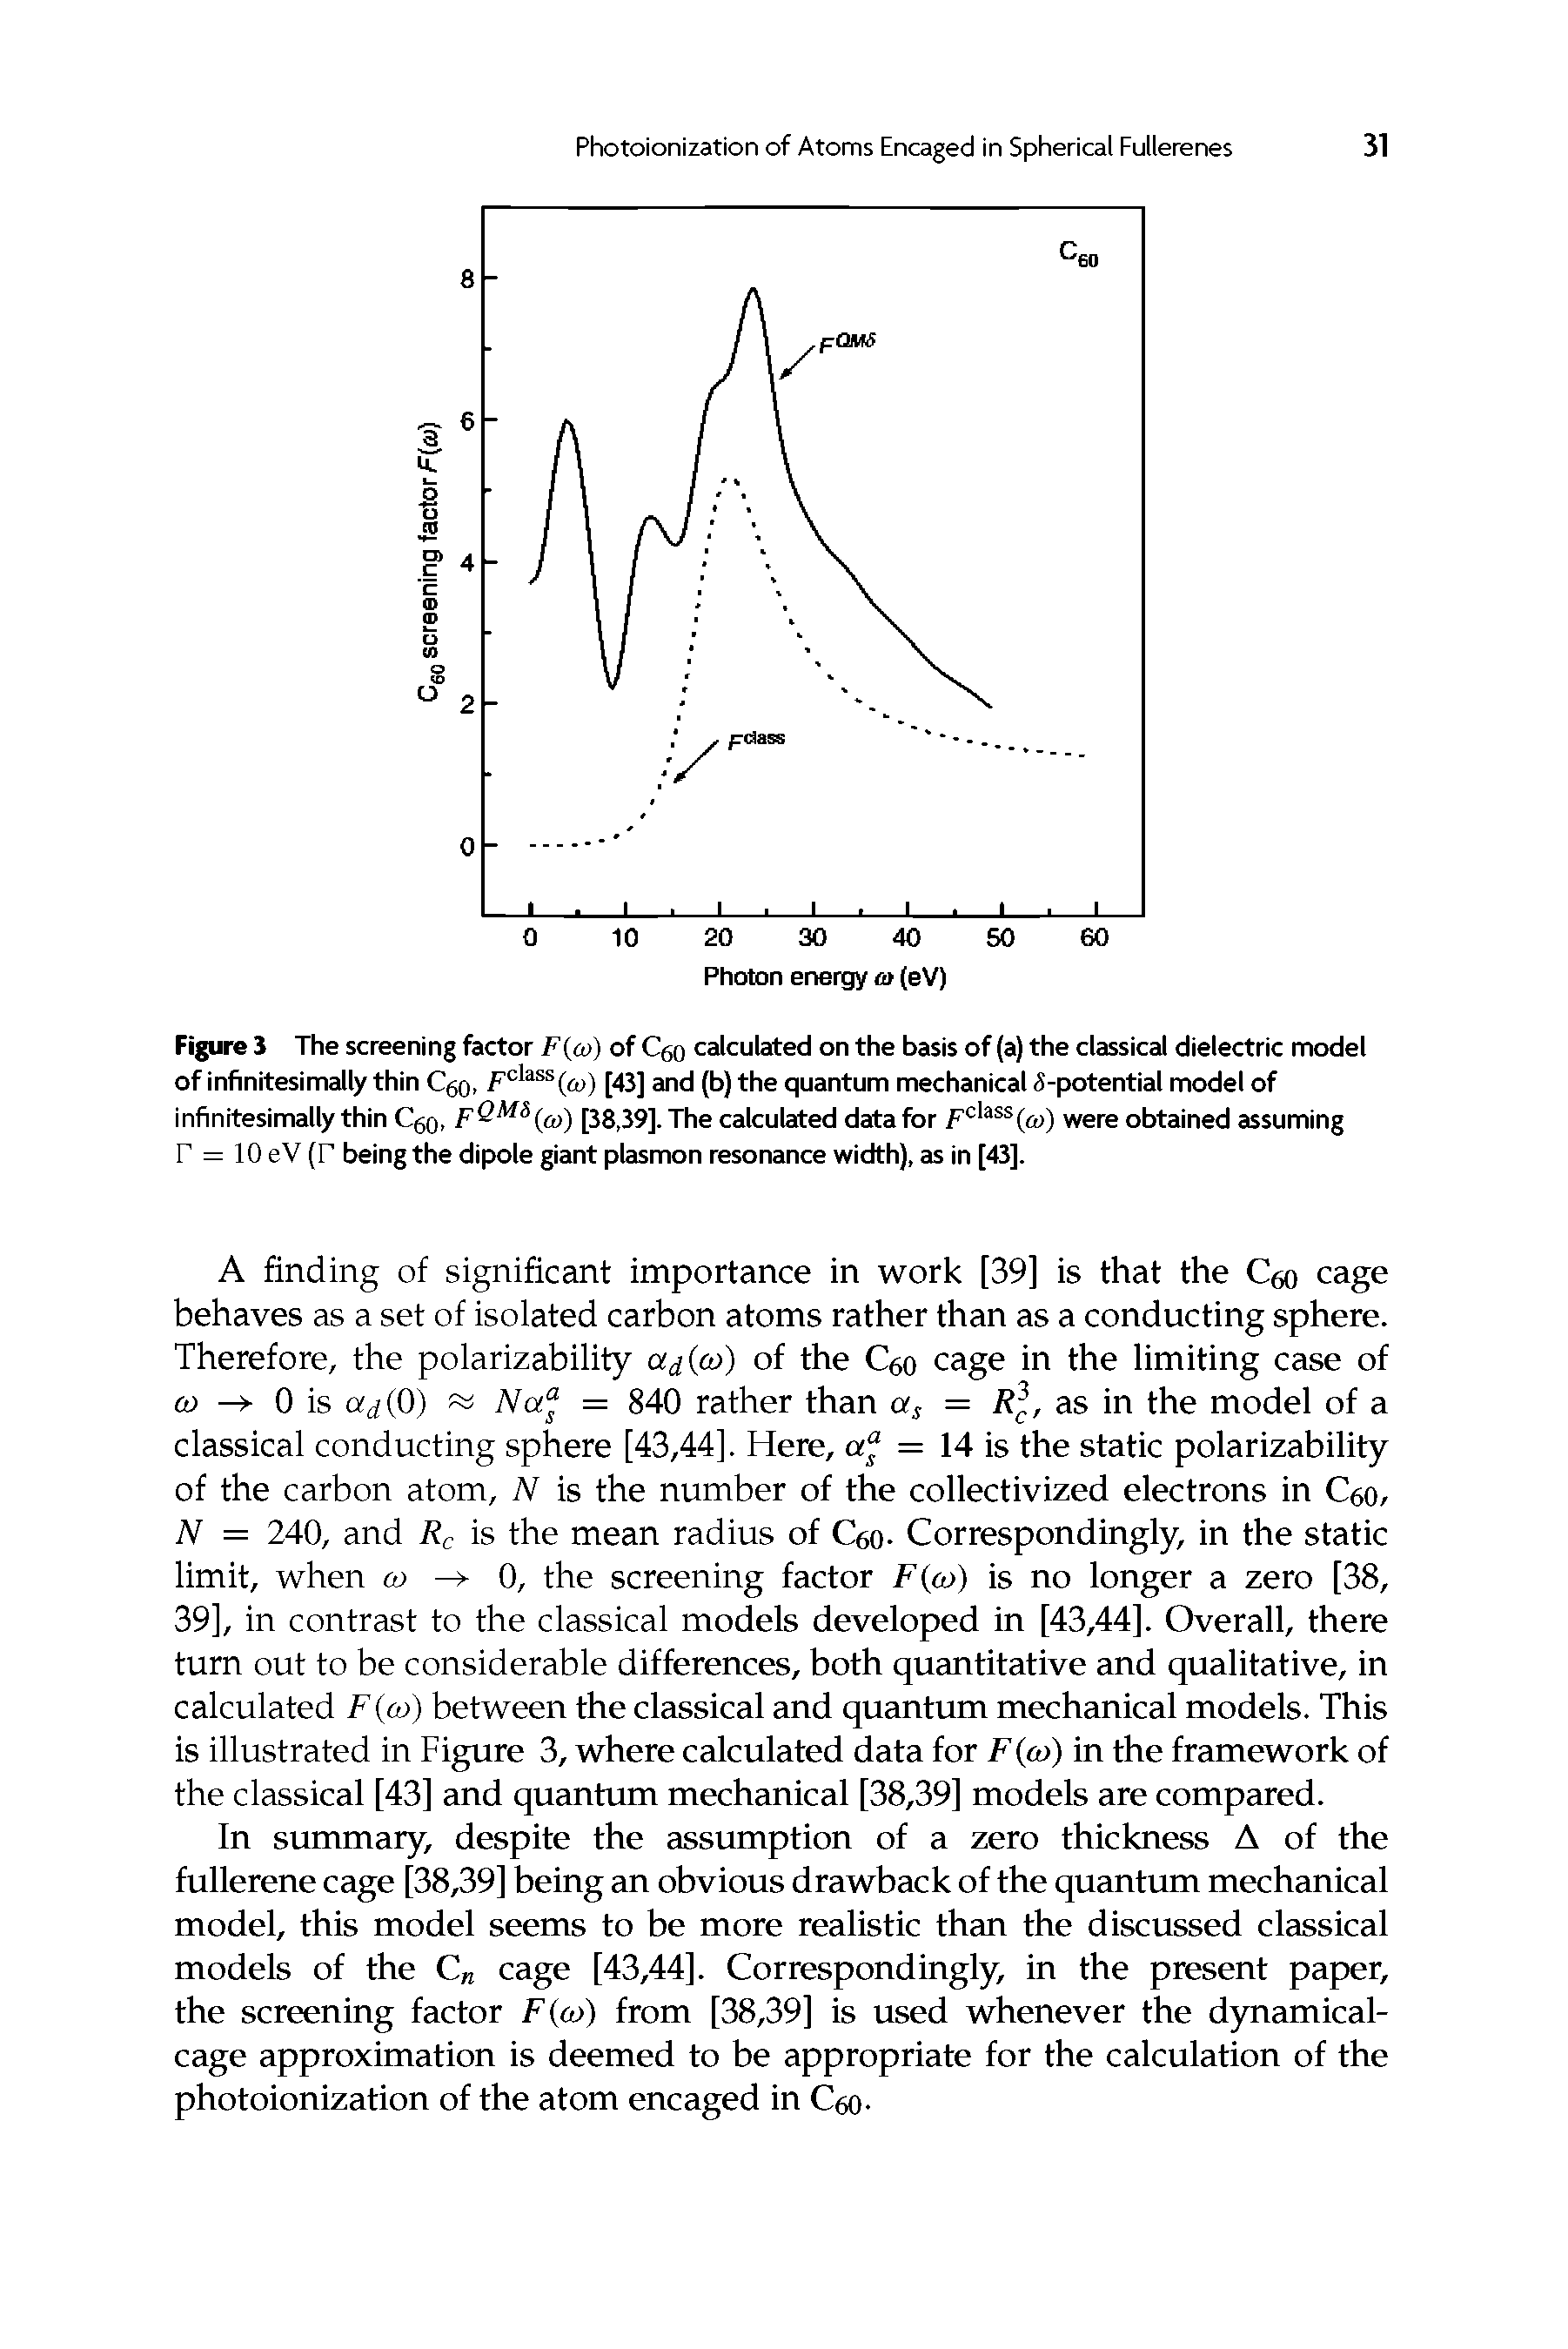 Figure 3 The screening factor F(co) of Cgo calculated on the basis of (a) the classical dielectric model of infinitesimally thin CgQ, Fclass(< ) [43] and (b) the quantum mechanical 5-potential model of infinitesimally thin CgQ, (a>) [38,39]. The calculated data for Fclass(o>) were obtained assuming...